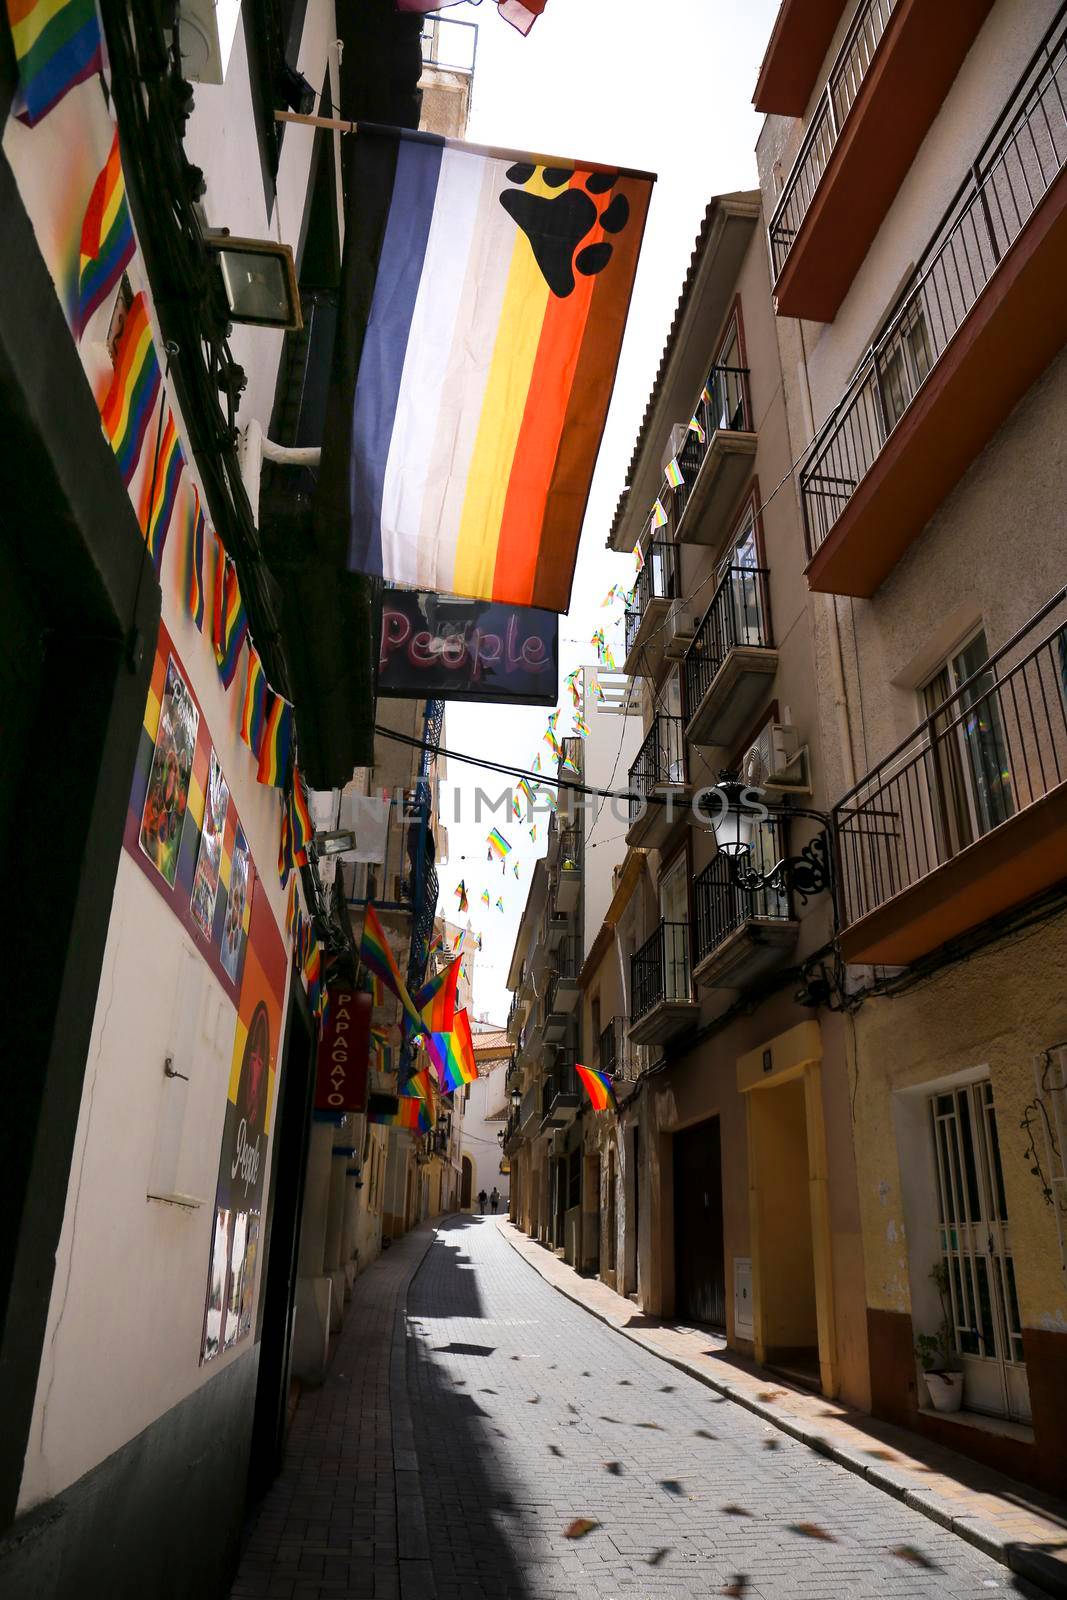 Benidorm, Alicante, Spain- September 11, 2022: Streets and facades adorned with colorful rainbow and bear flags for The Gay Pride in Benidorm